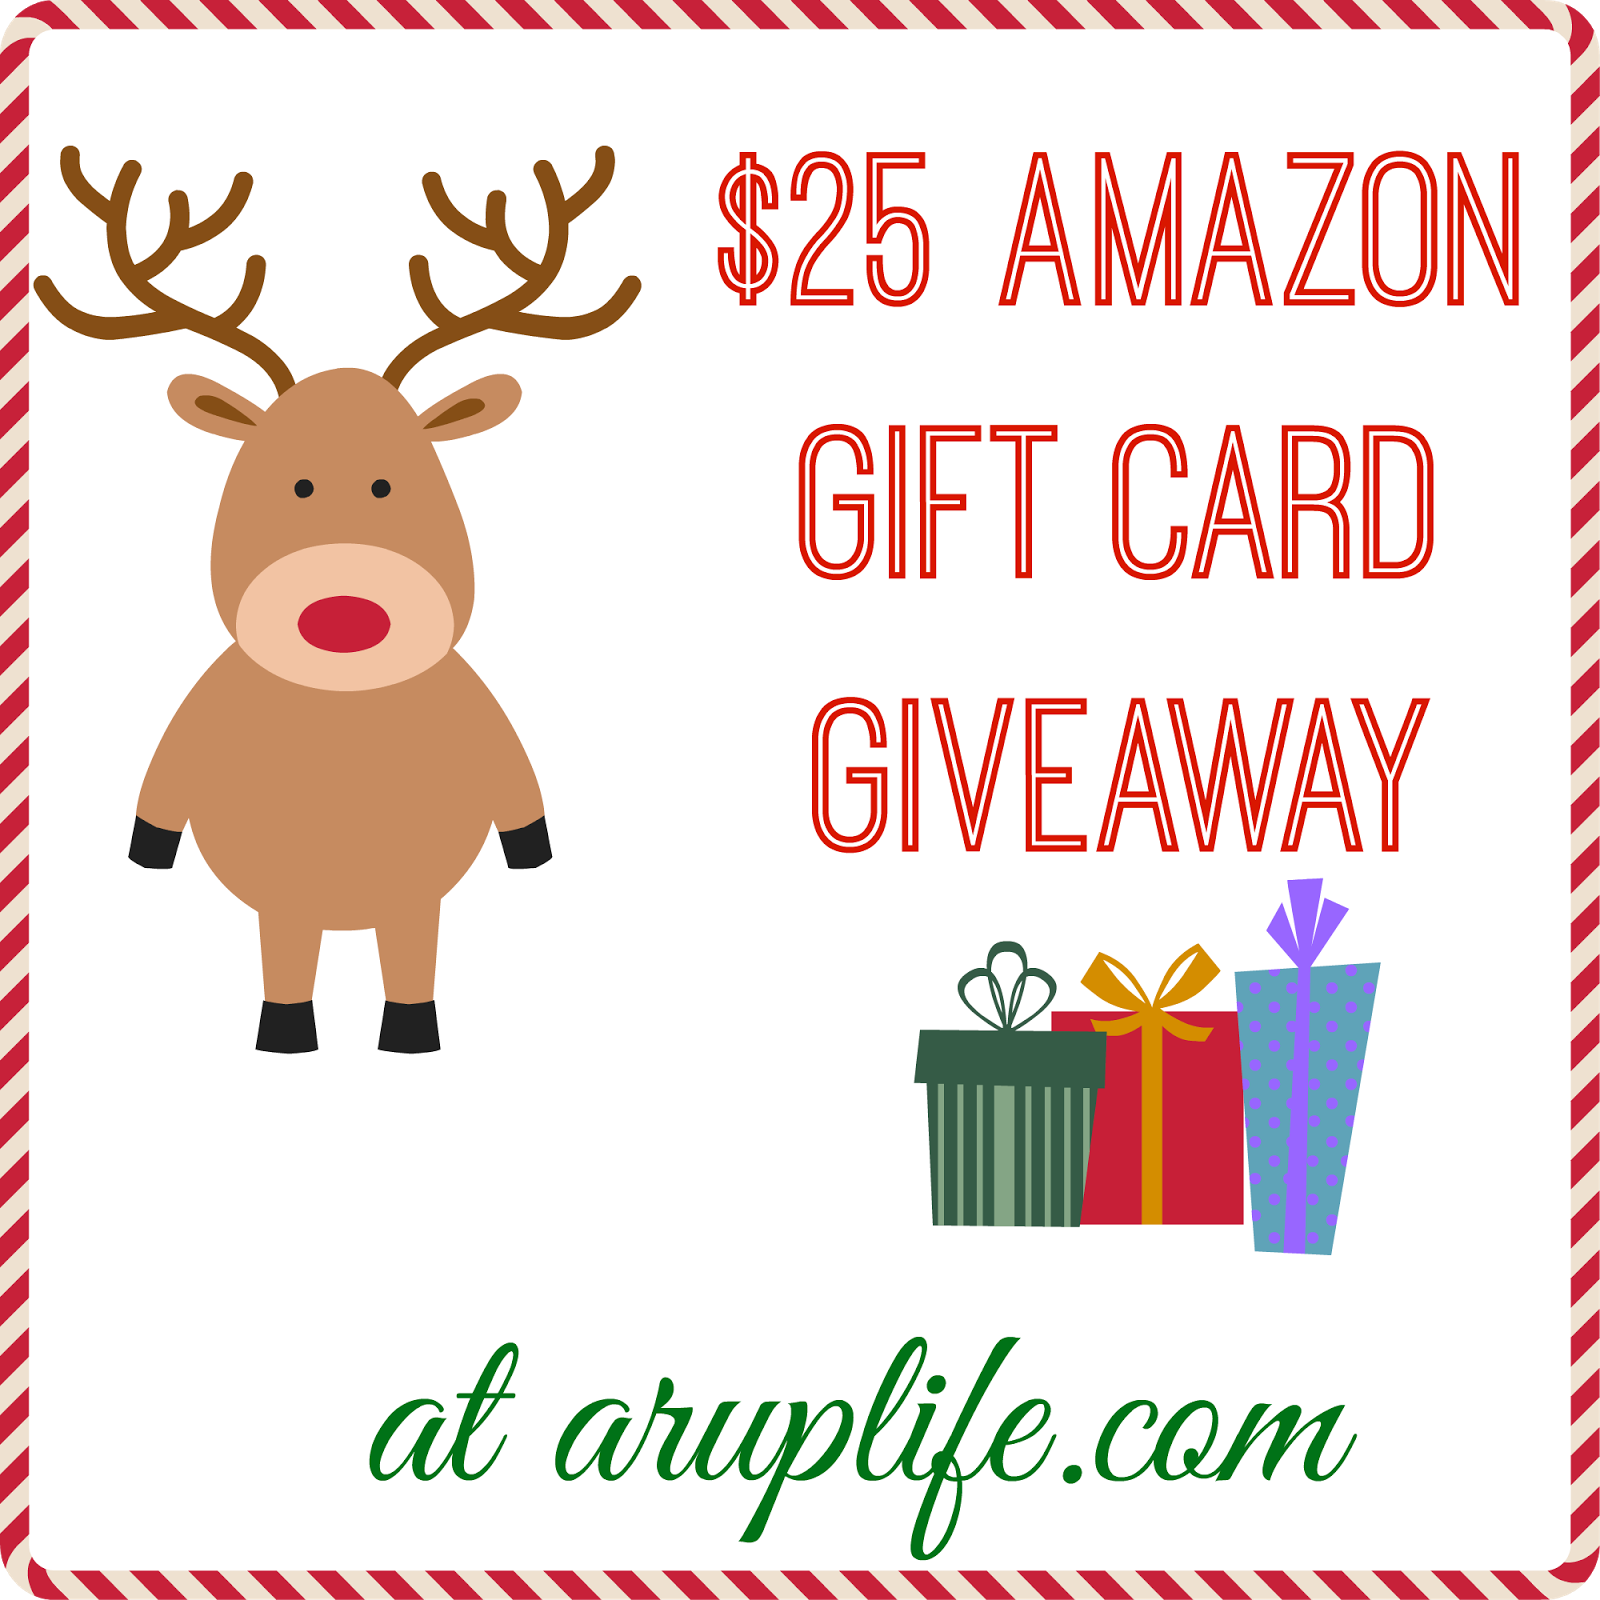 A RUP LIFE: $25 Amazon Gift Card Giveaway!